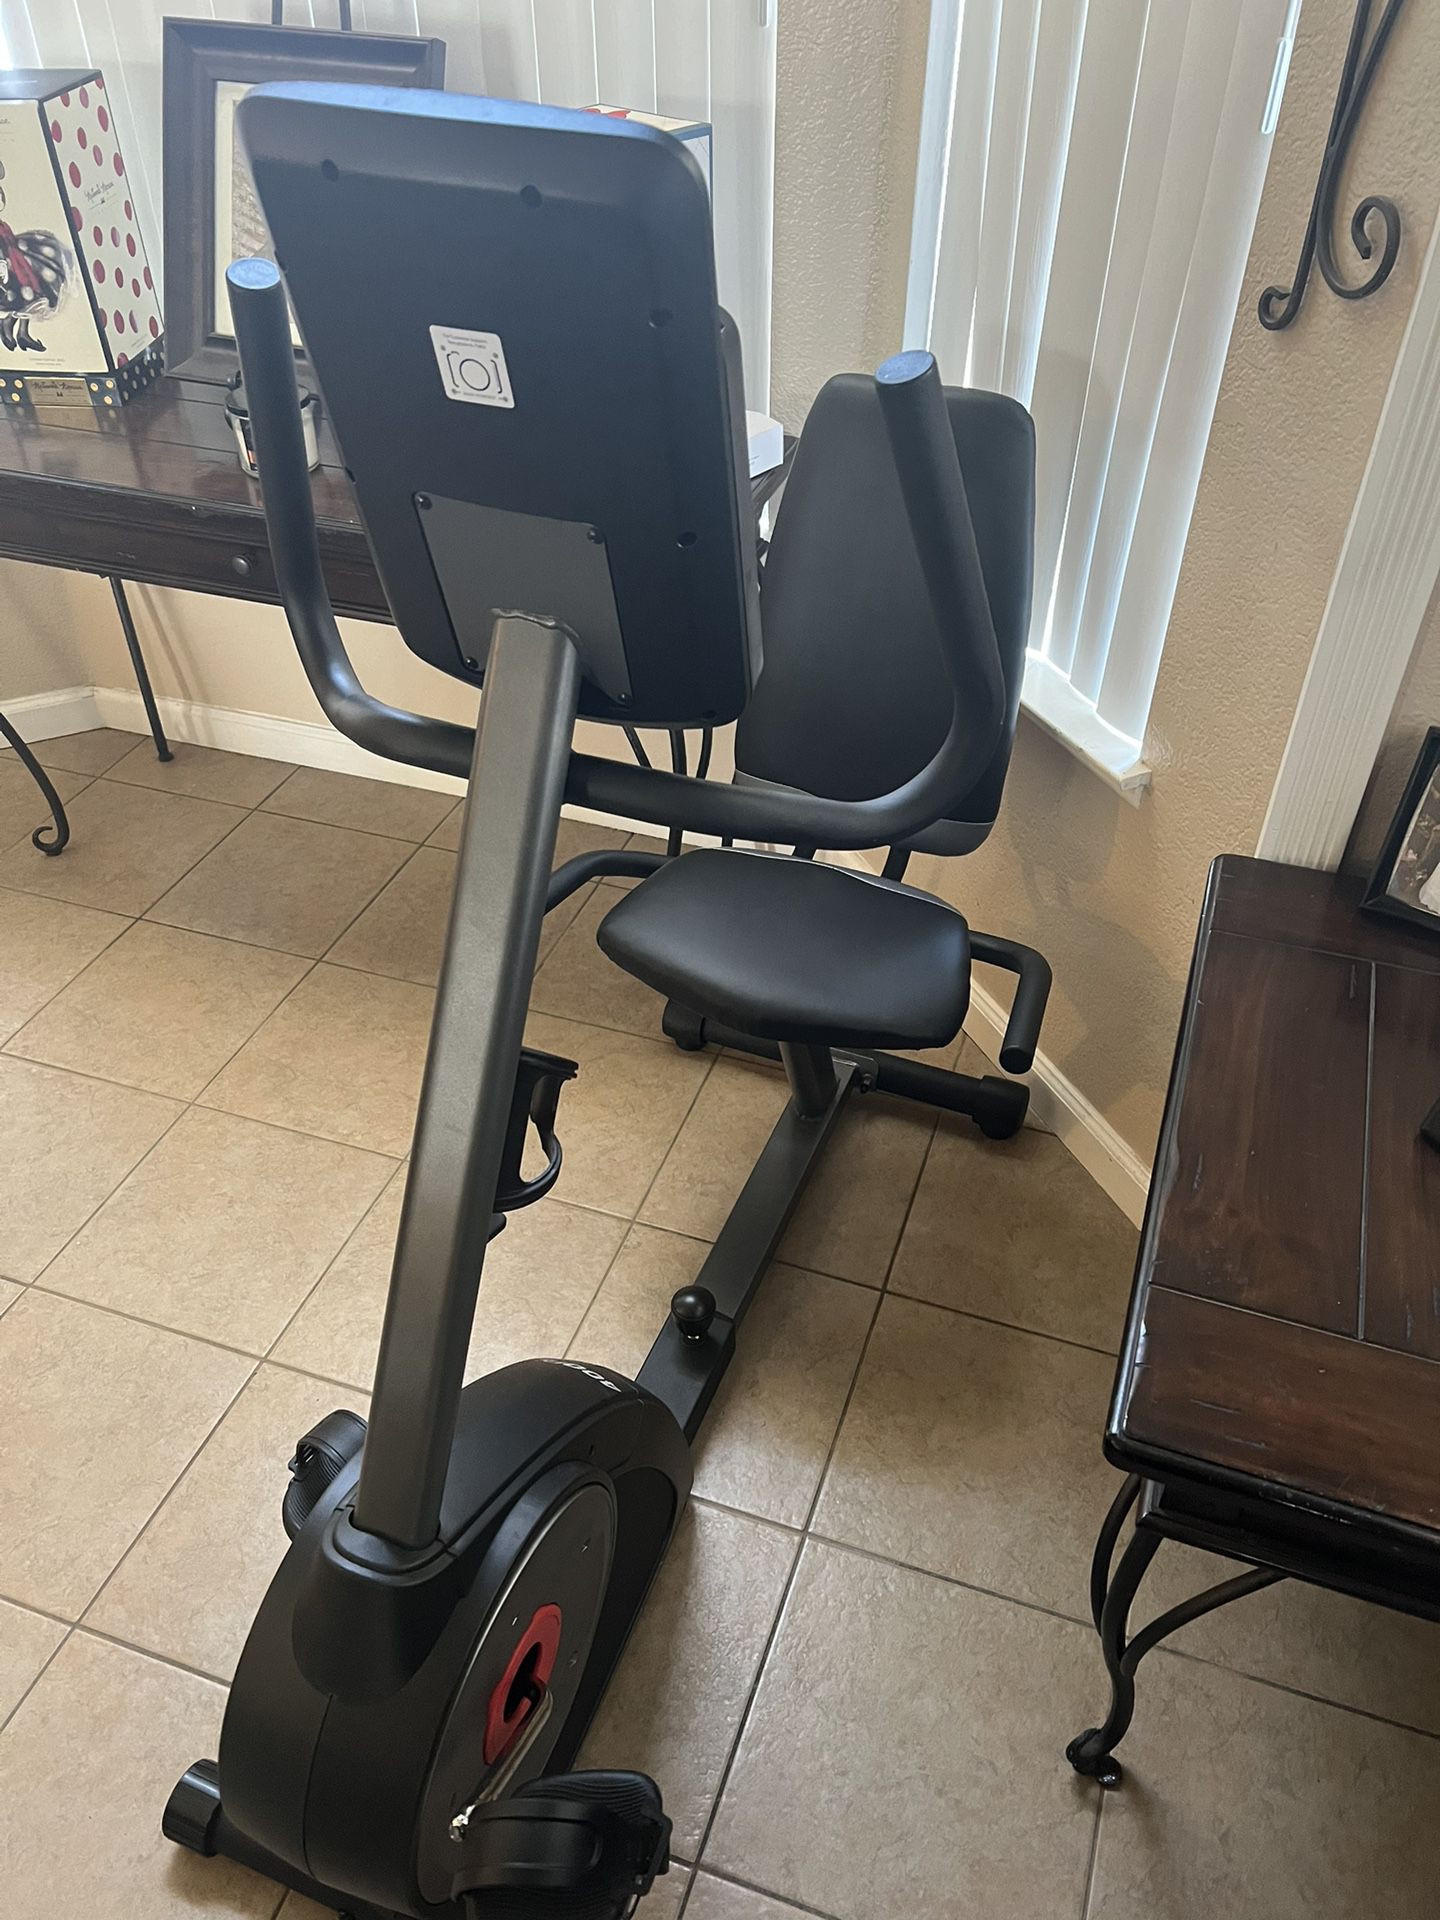 Exercise bike special for knee therapy